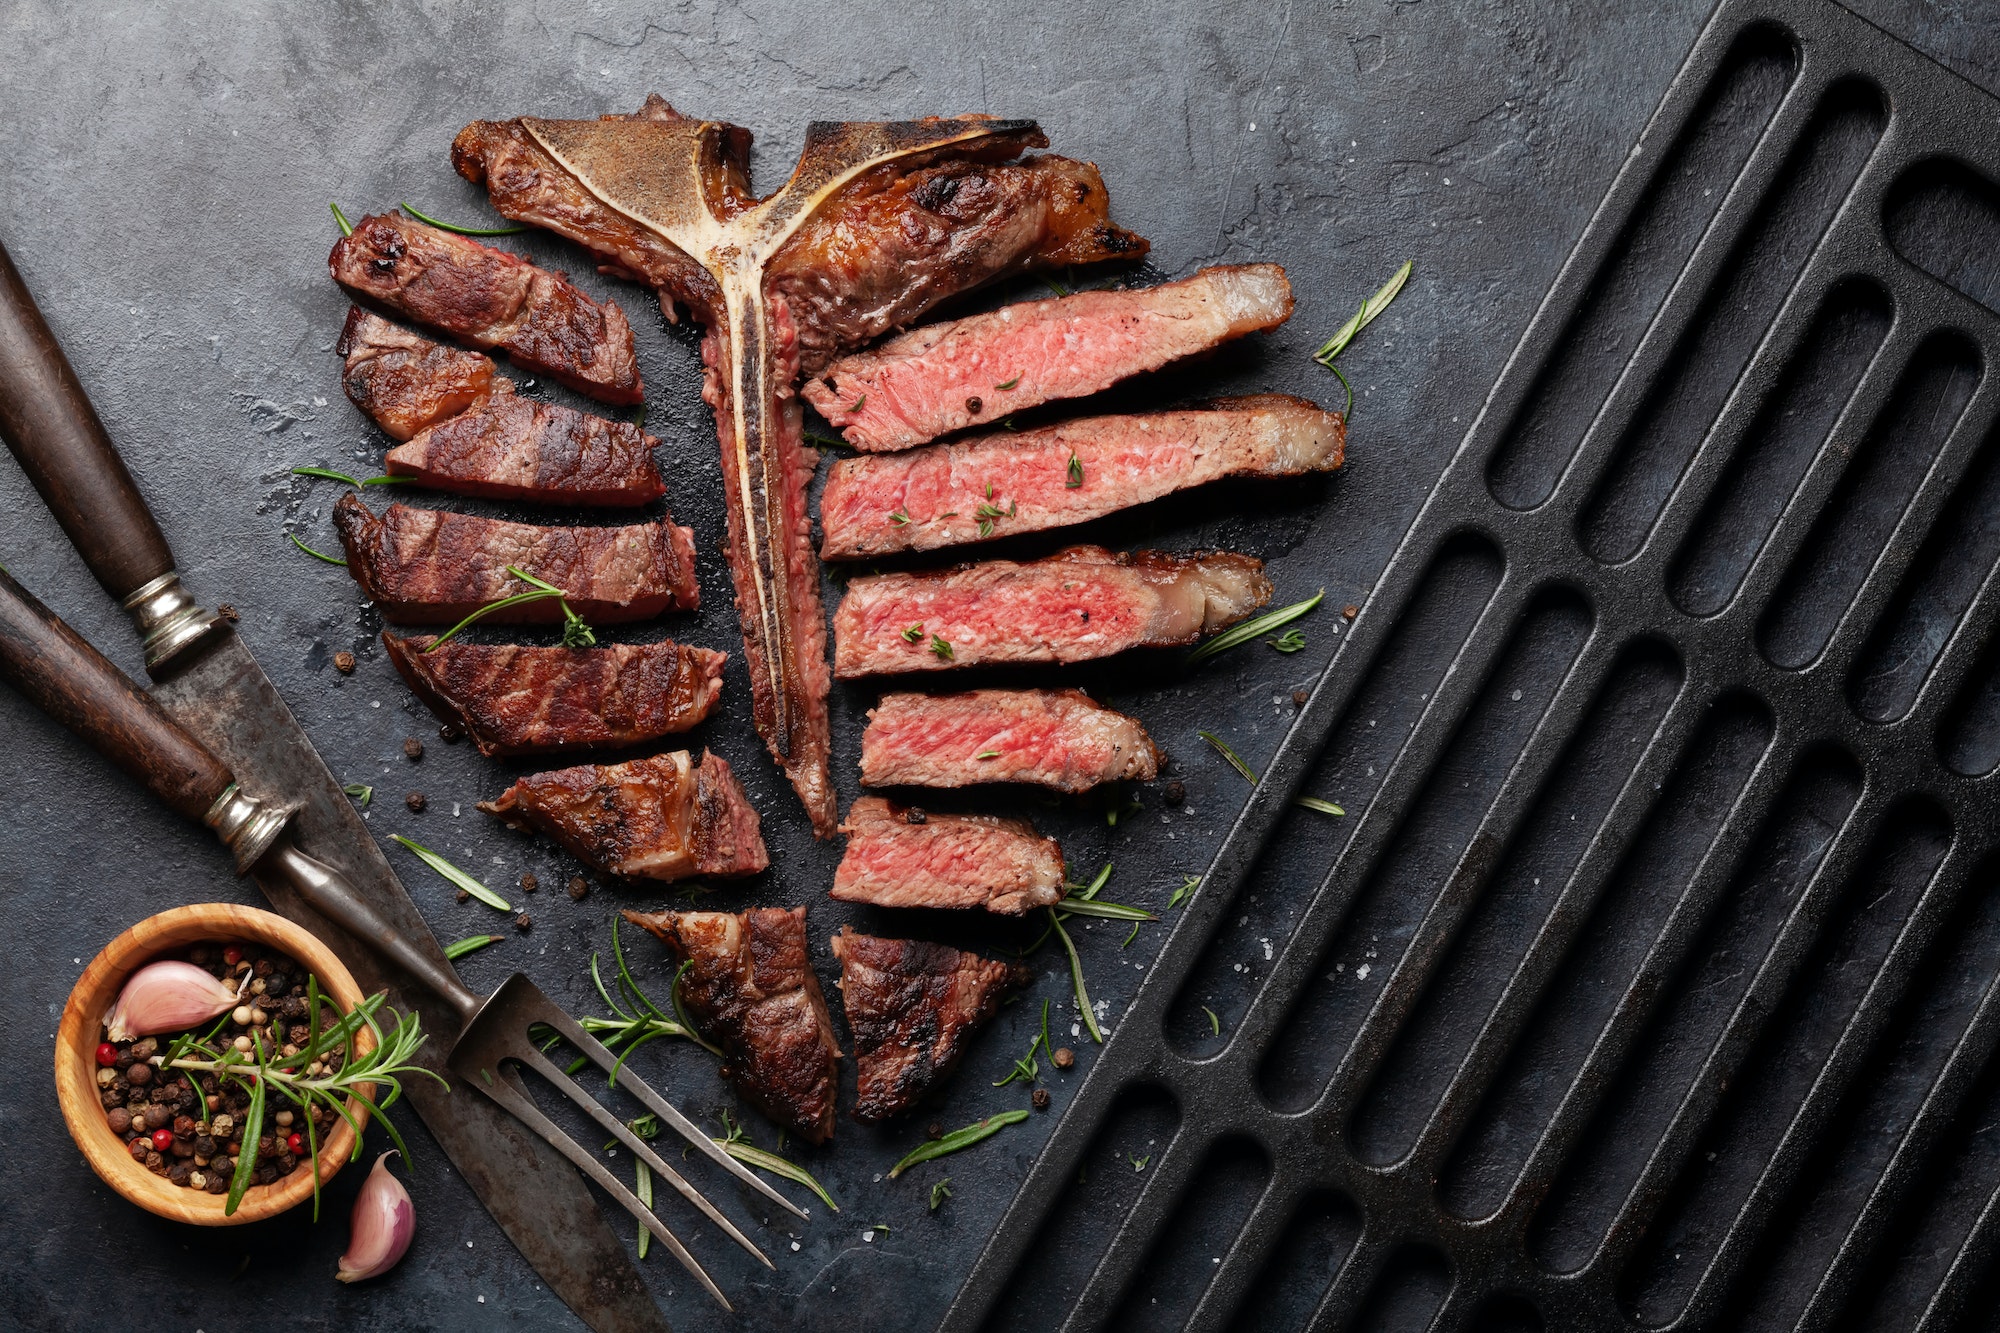 Grill Perfect Steaks Every Time: Discover SteakAger Pro